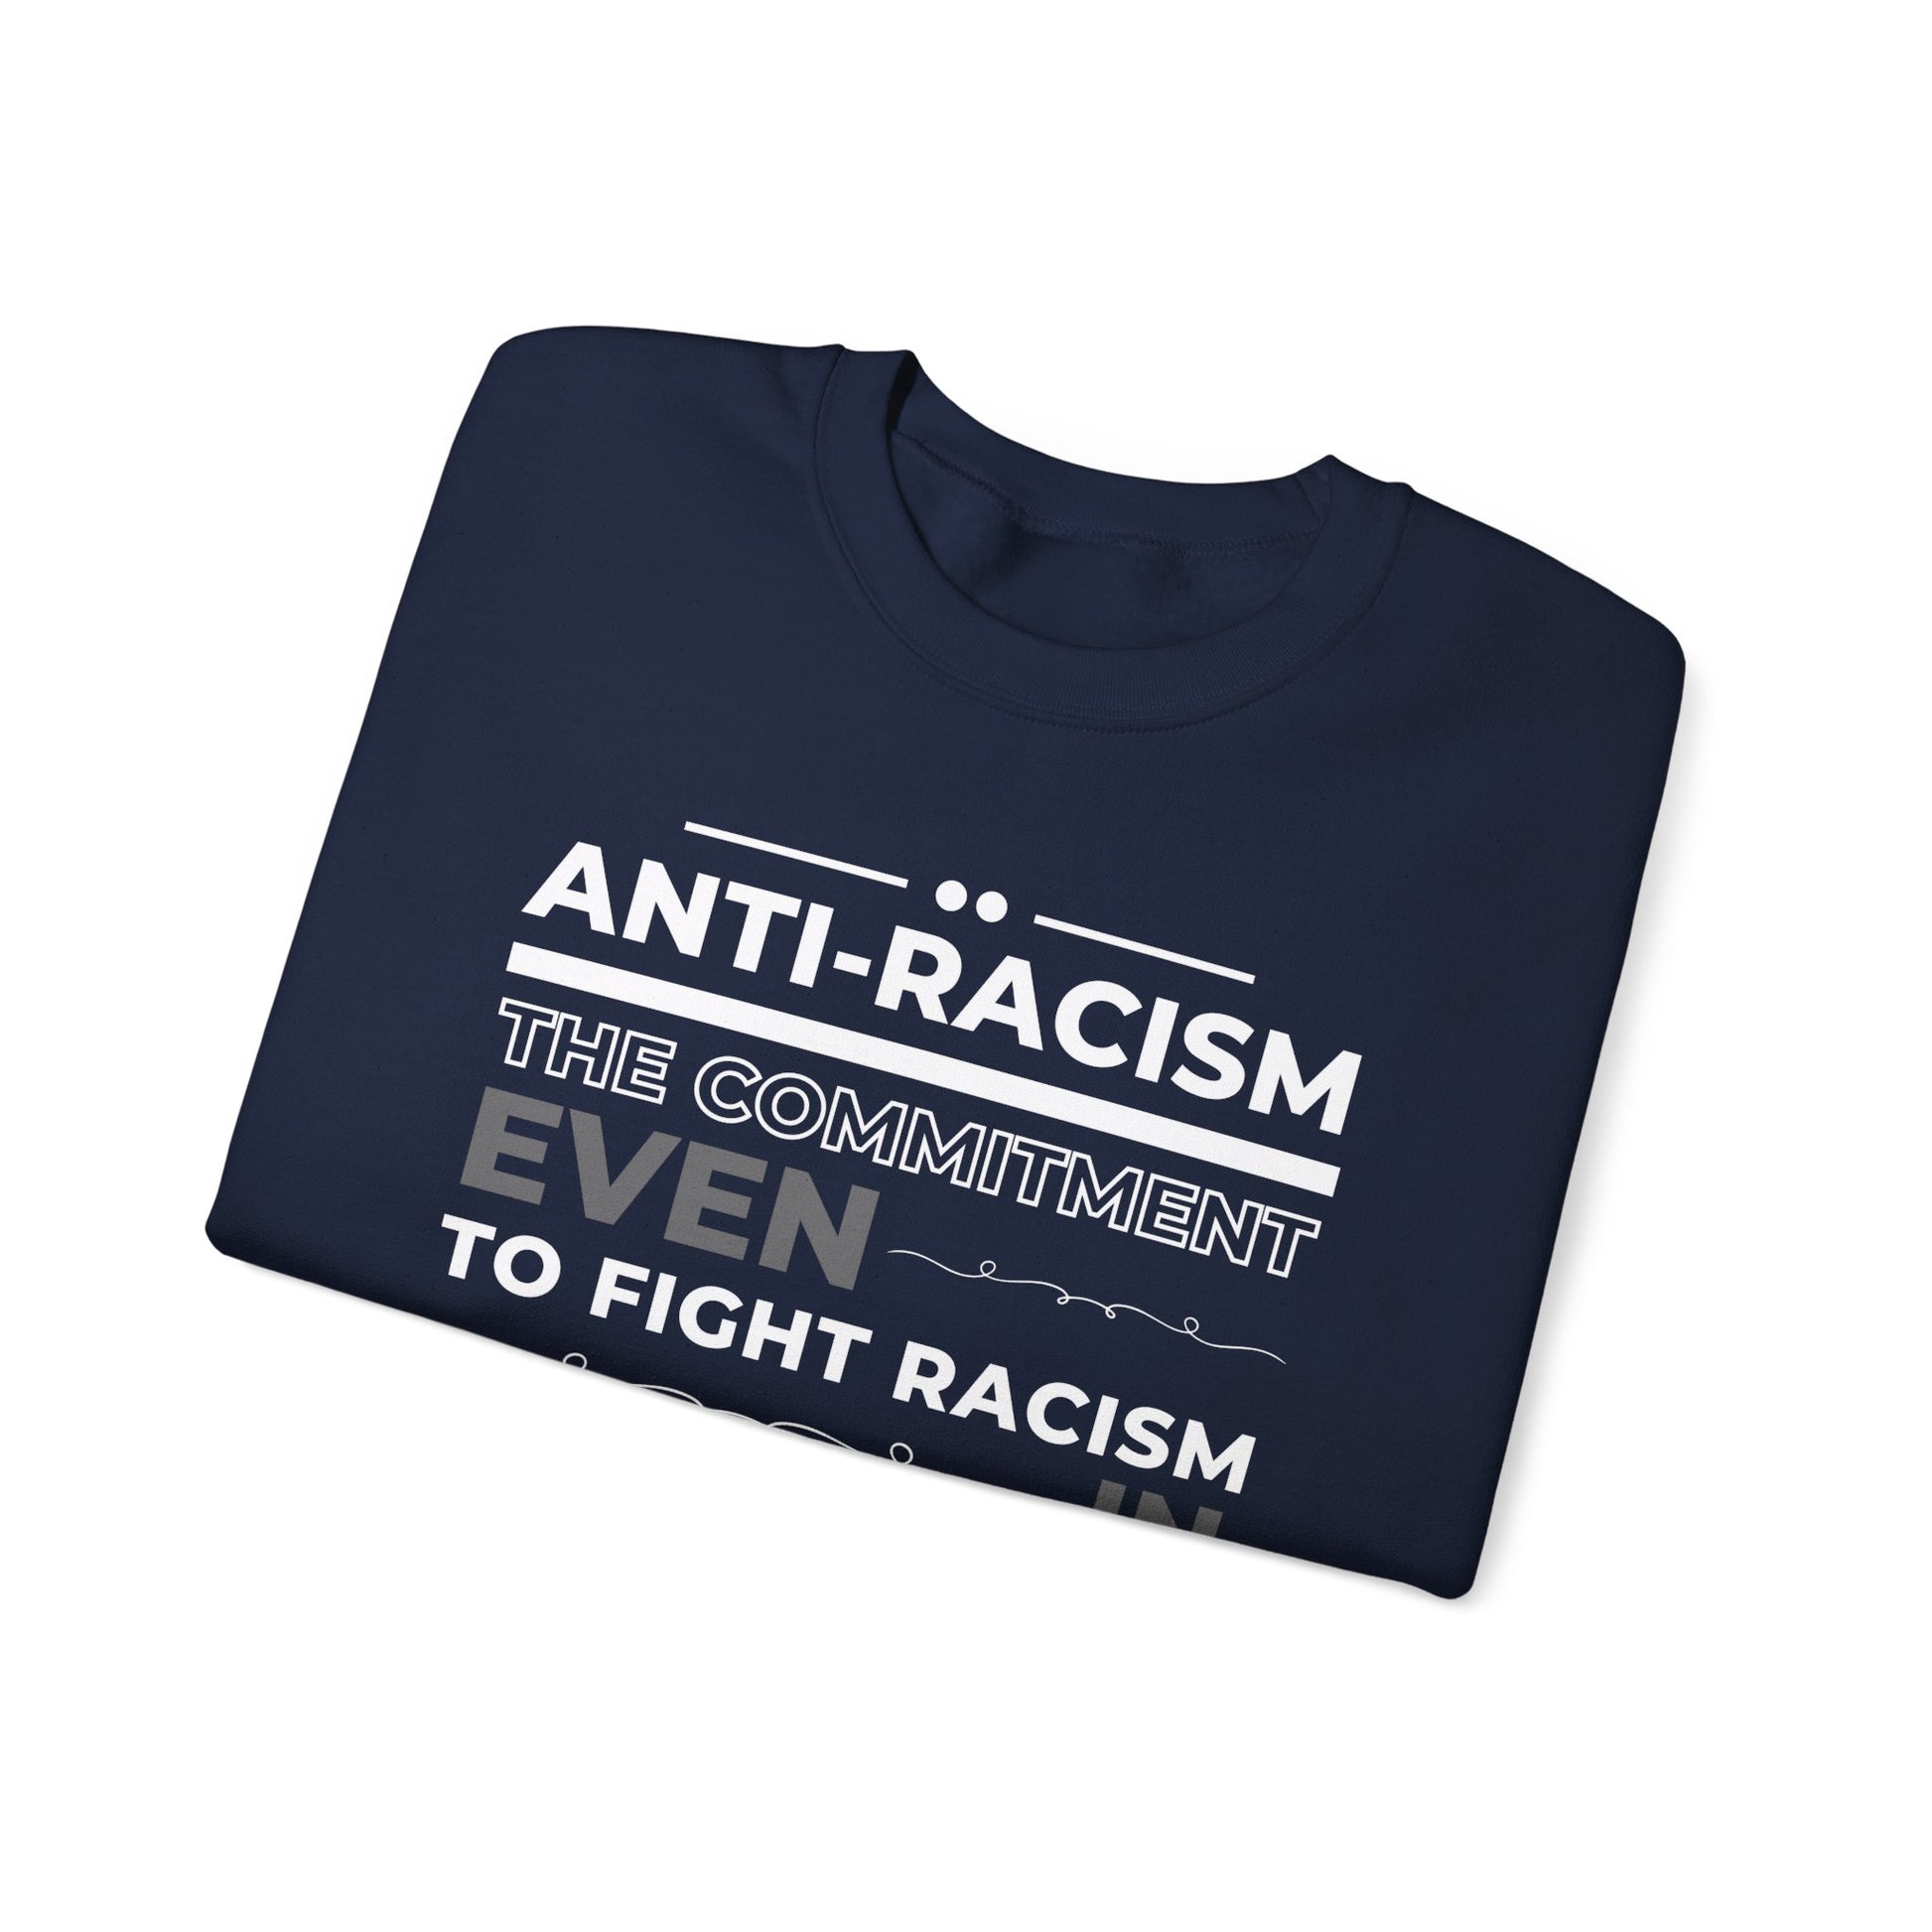 Navy Gildan 18000 Sweatshirt with a strong anti-racism message: The commitment to fight racism wherever we find it, even in ourselves.